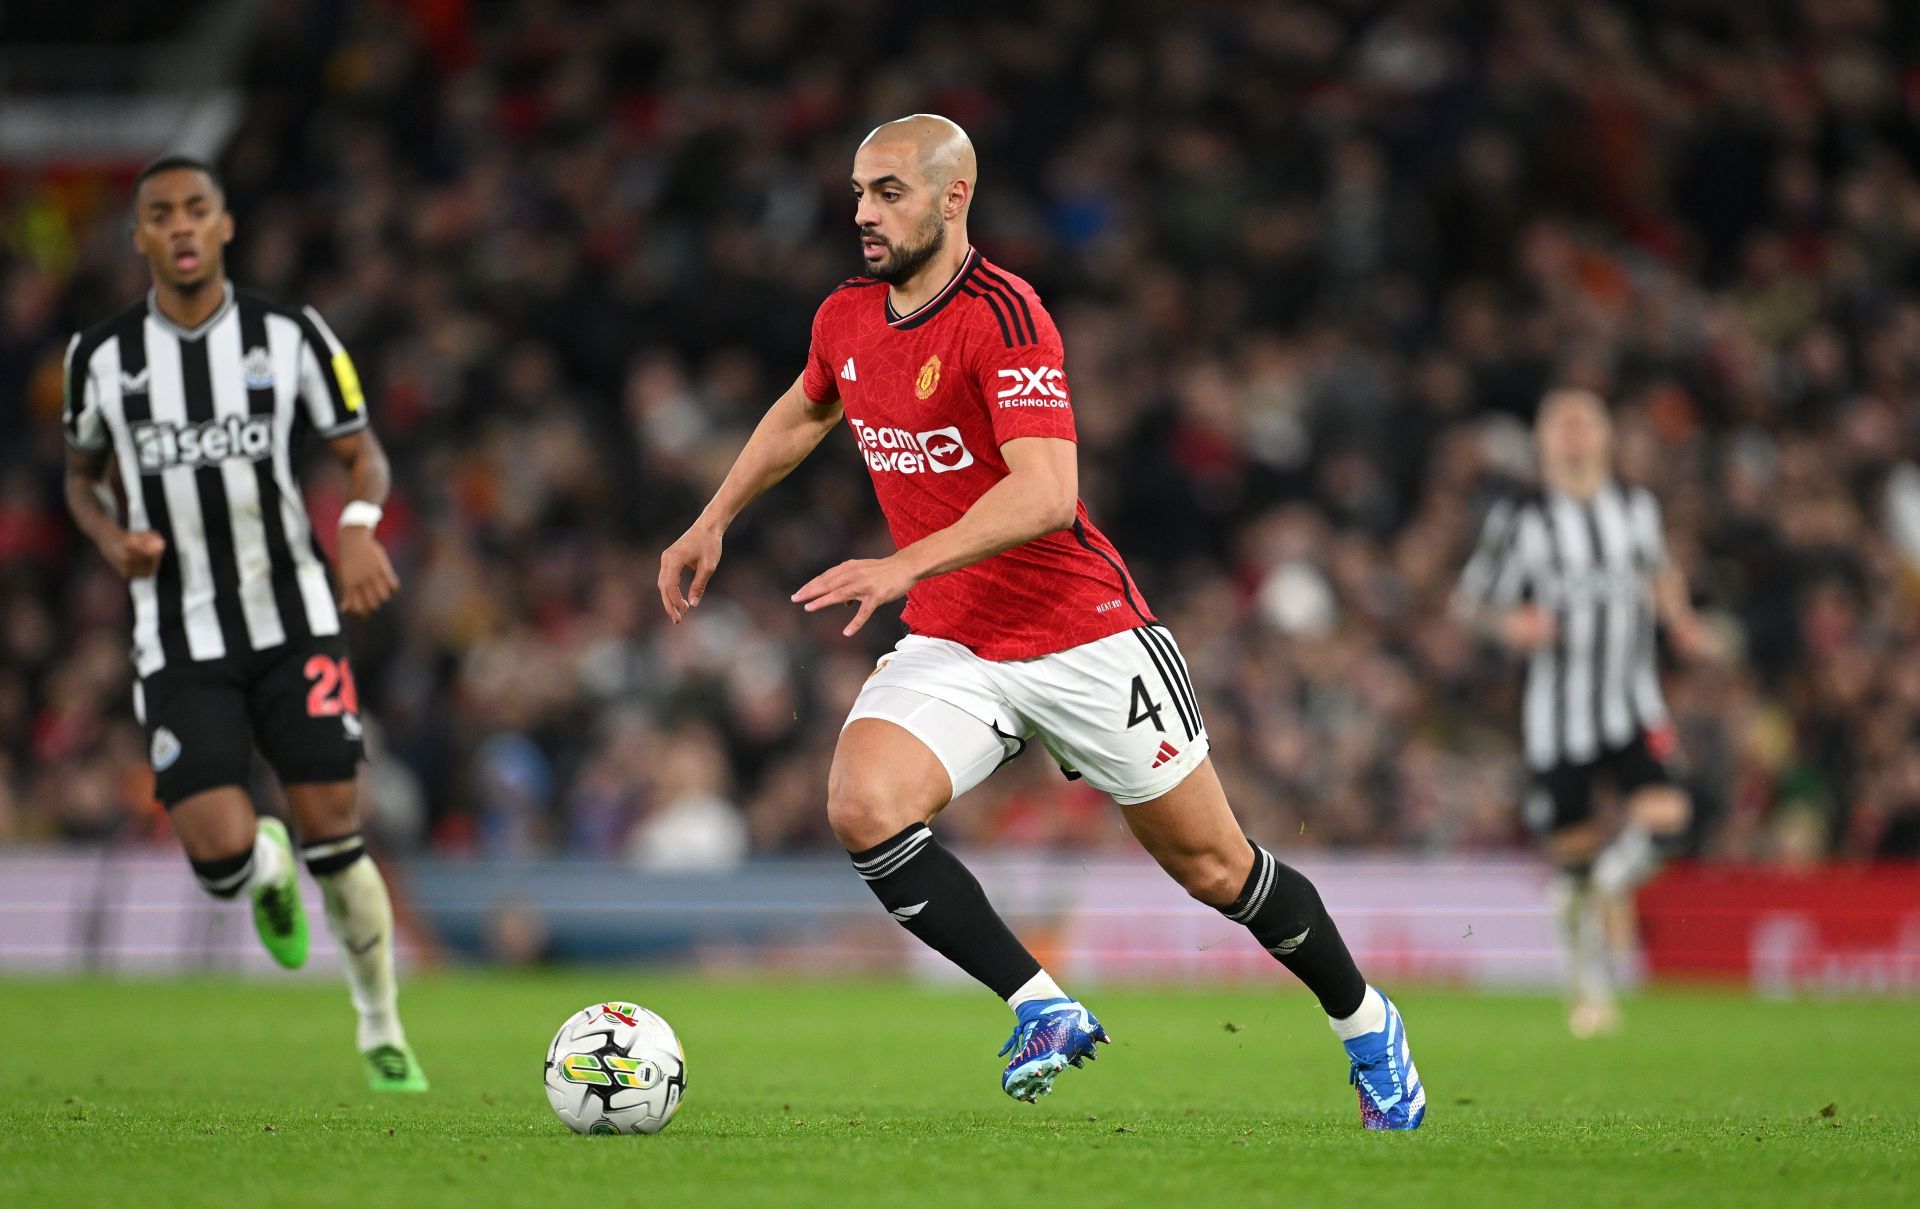 Sofyan Amrabat has been a disappointment at Old Trafford.